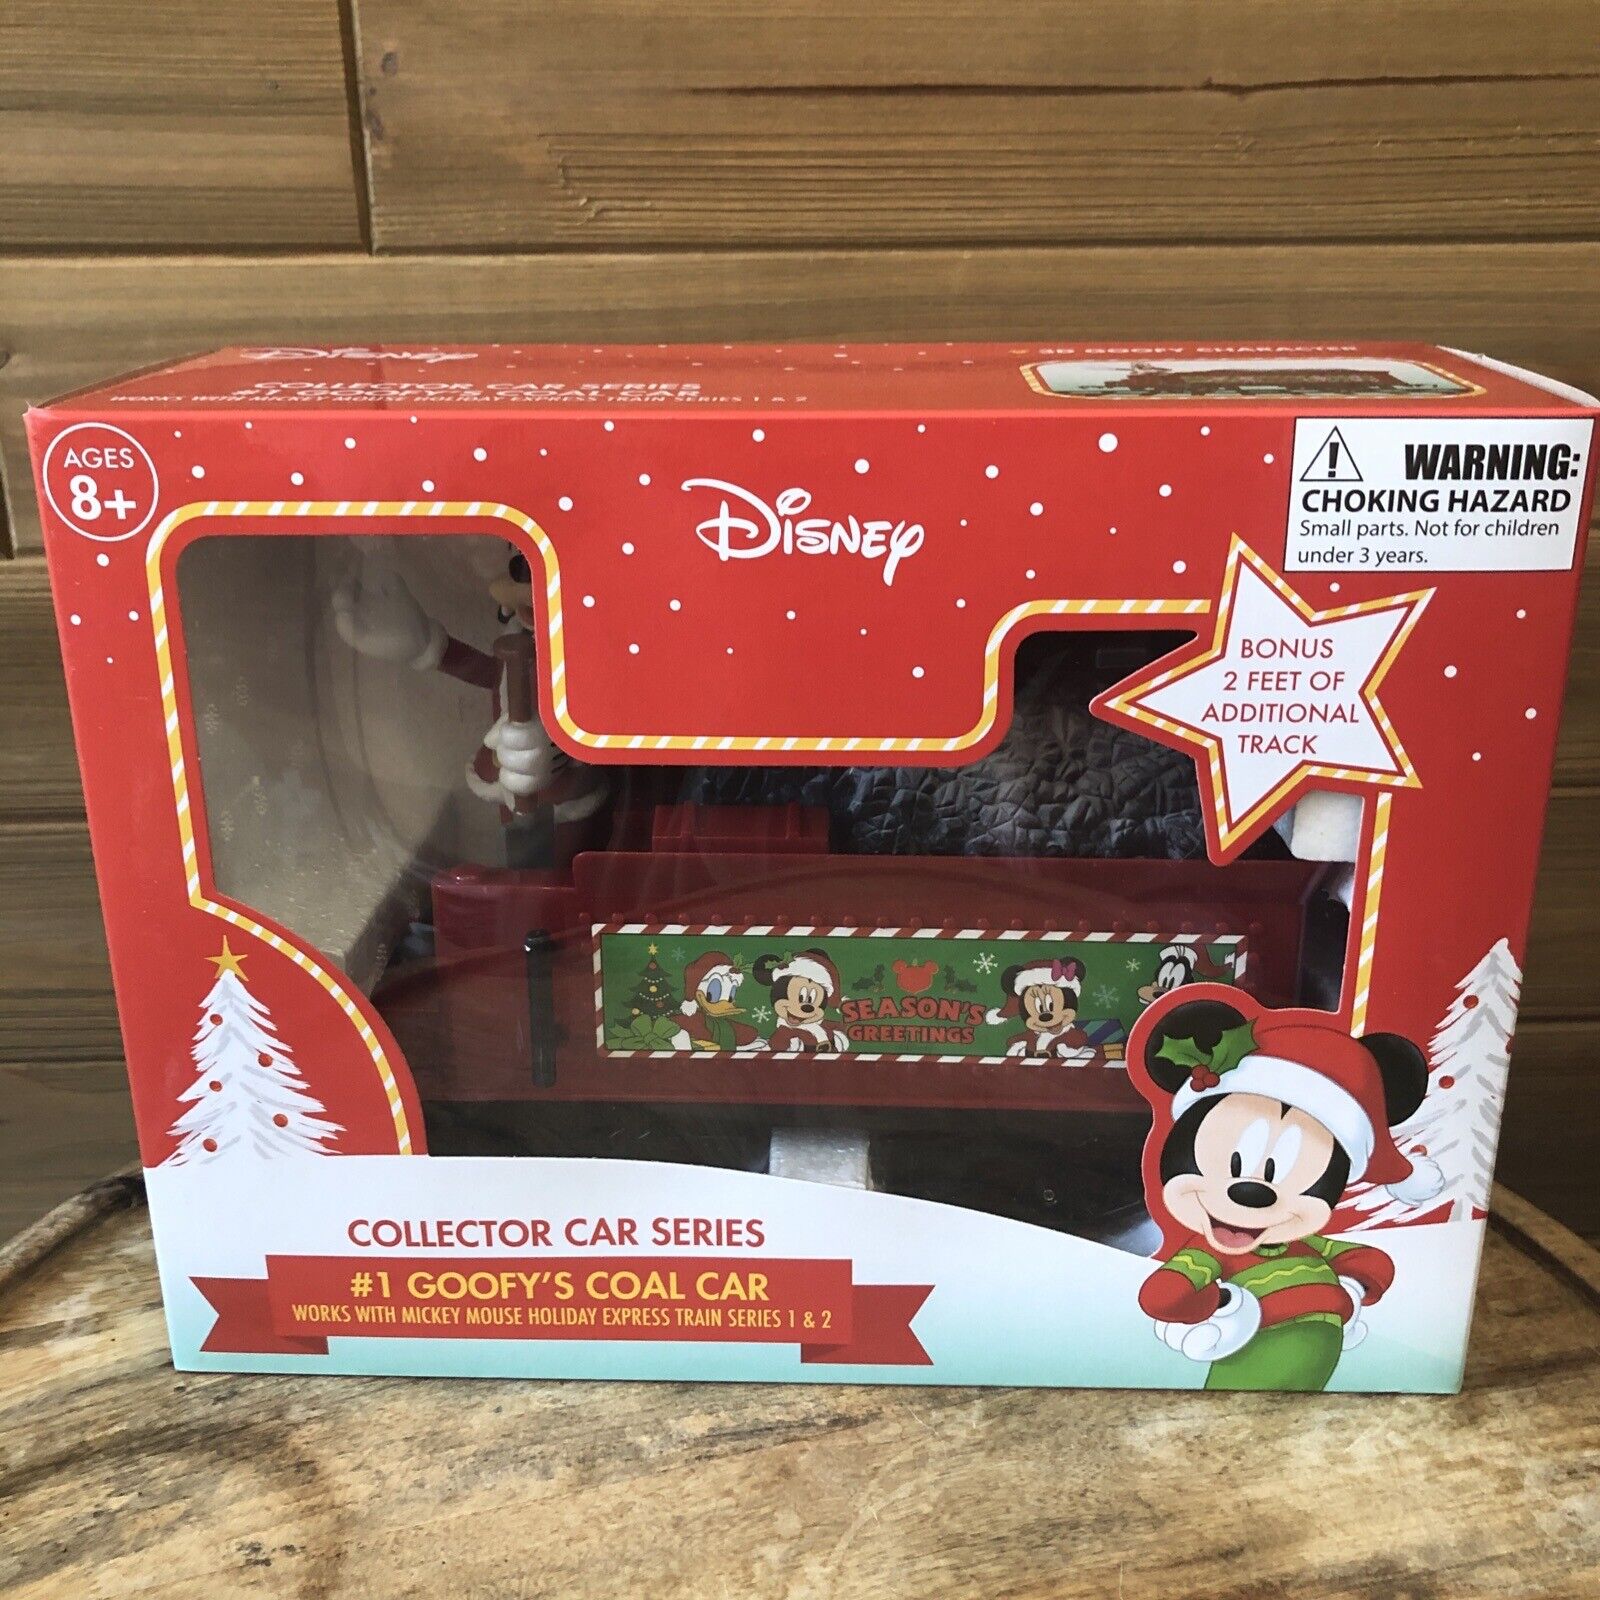 Disney Mickey Mouse Holiday Express #1 Goofy\'s Coal Car Collector Series Train